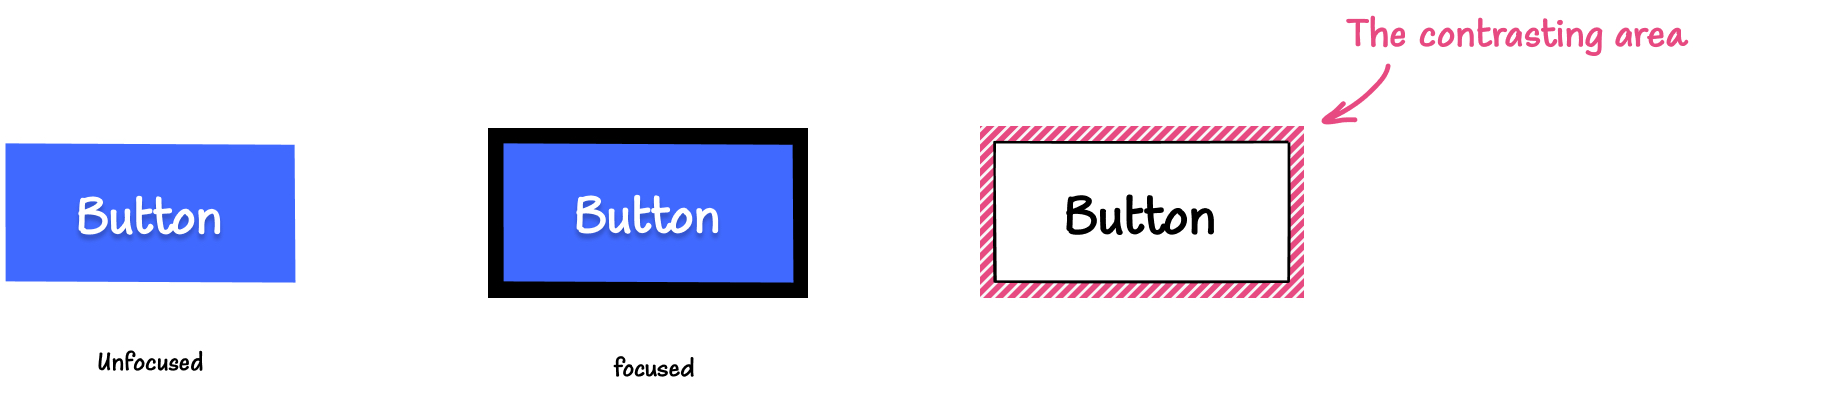 Illustration: On the left is a blue button with a white label in its default, unfocused state. In the middle is the blue button with a thick black outline around it. On the right, is a button with the same outline but with a pattern applied to it, indicating that this patterned area is the contrasting area.